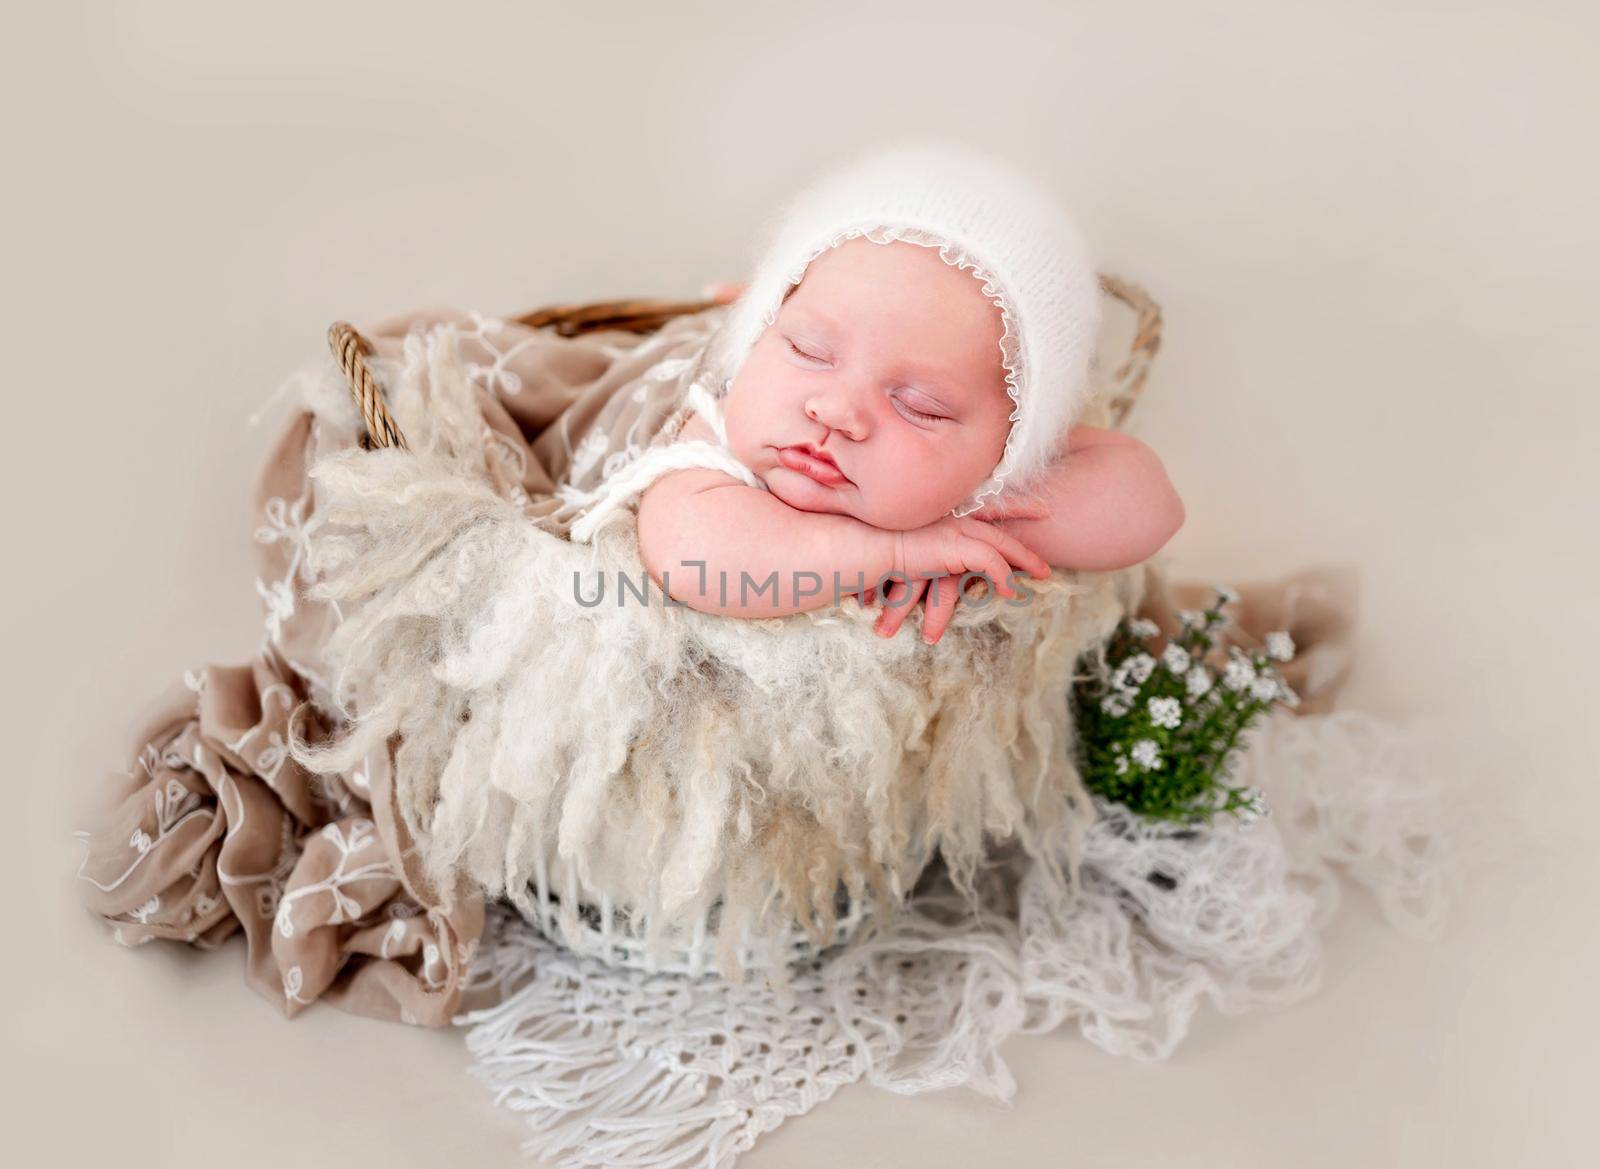 Newborn baby girl wearing knitted white hat sleeping in the basket and holding her hands under cheek. Little cute infant child napping. Adorable kid during studio photoshoot on beige background